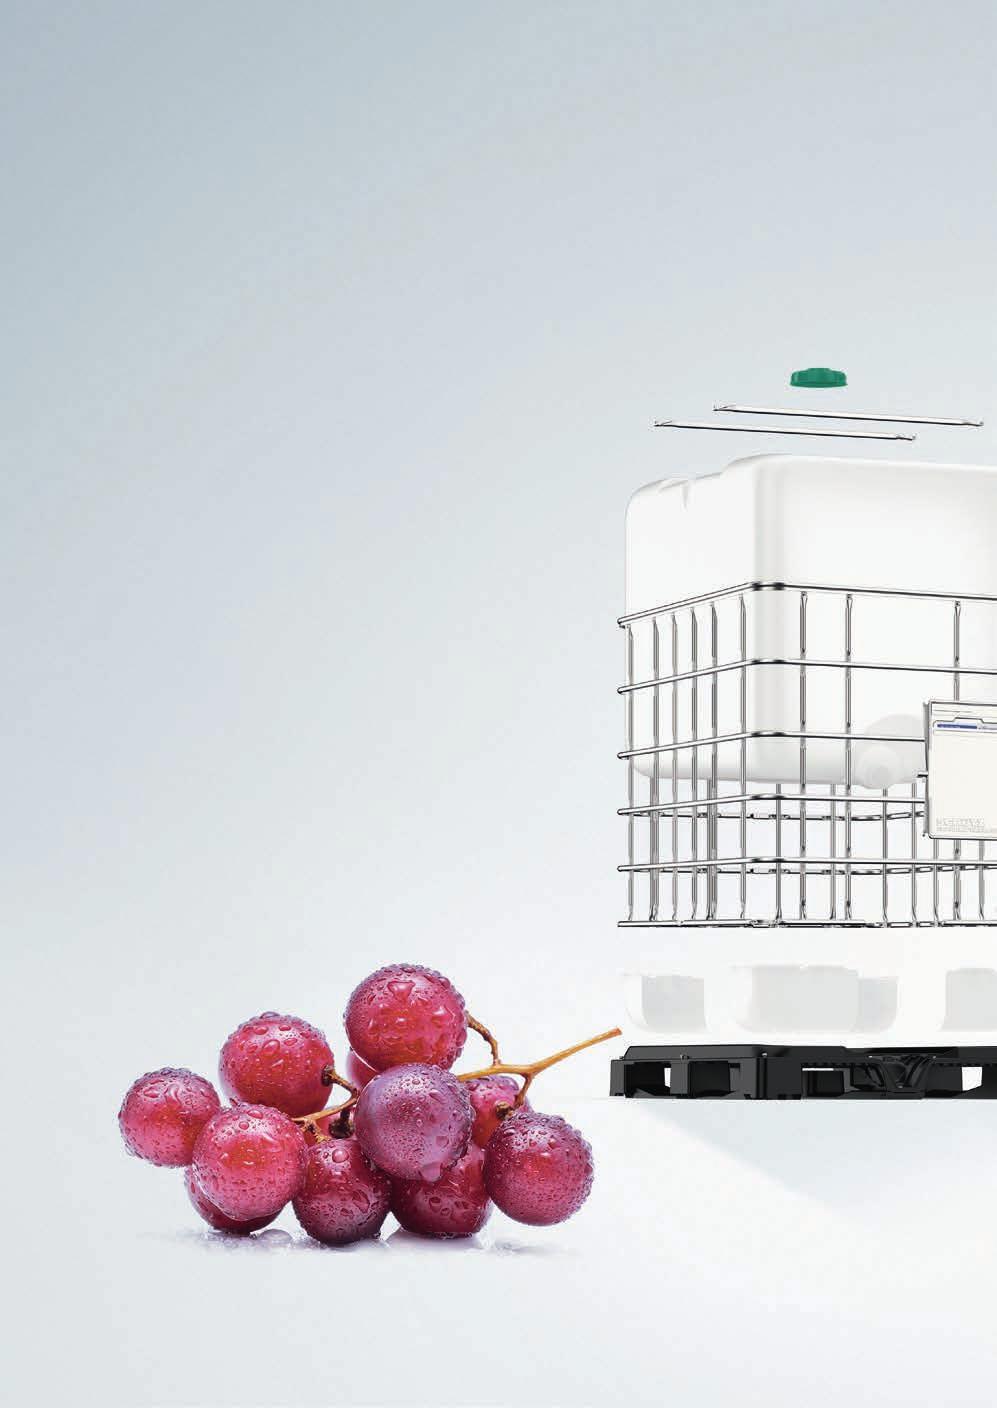 Your wine is ripe for a new solution The SCHÜTZ WINE-STORE-AGE ECOBULK. Making wine demands particular care over the entire process, from maturing to storage, from transport to bottling.